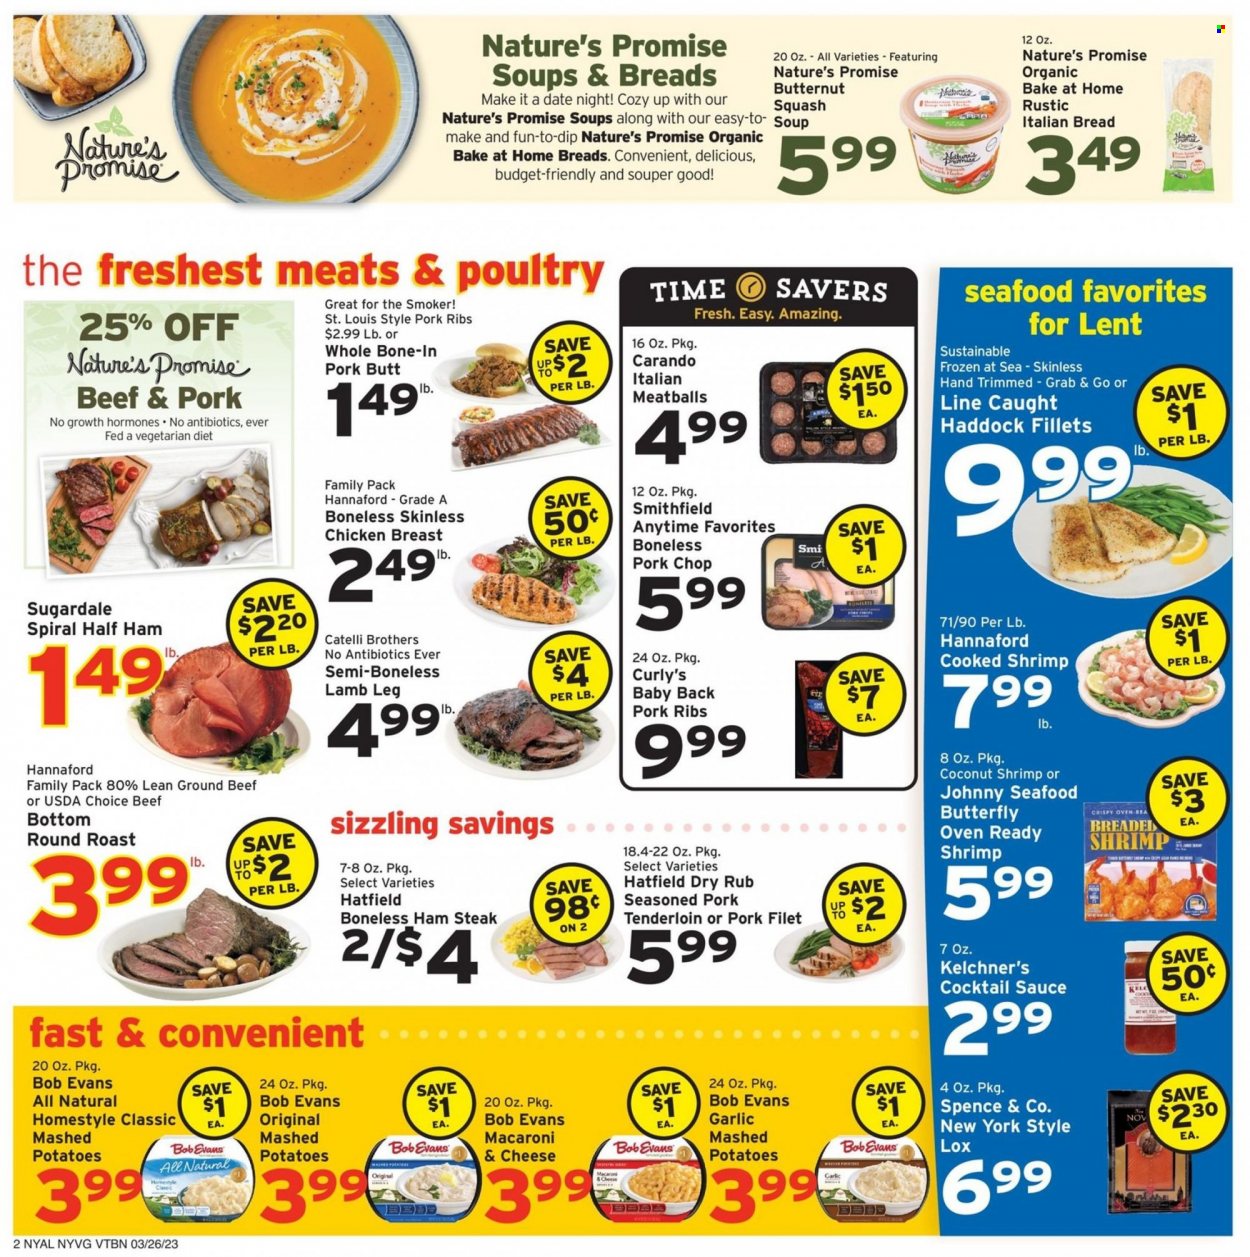 thumbnail - Hannaford Flyer - 03/26/2023 - 04/01/2023 - Sales products - bread, Nature’s Promise, butternut squash, garlic, haddock, seafood, shrimps, macaroni & cheese, mashed potatoes, meatballs, soup, sauce, Bob Evans, Sugardale, roast, half ham, ham, ham steaks, dip, cocktail sauce, chicken breasts, chicken, beef meat, ground beef, steak, round roast, ribs, pork chops, pork meat, pork ribs, pork tenderloin, pork back ribs, pork butt, lamb meat, lamb leg. Page 2.